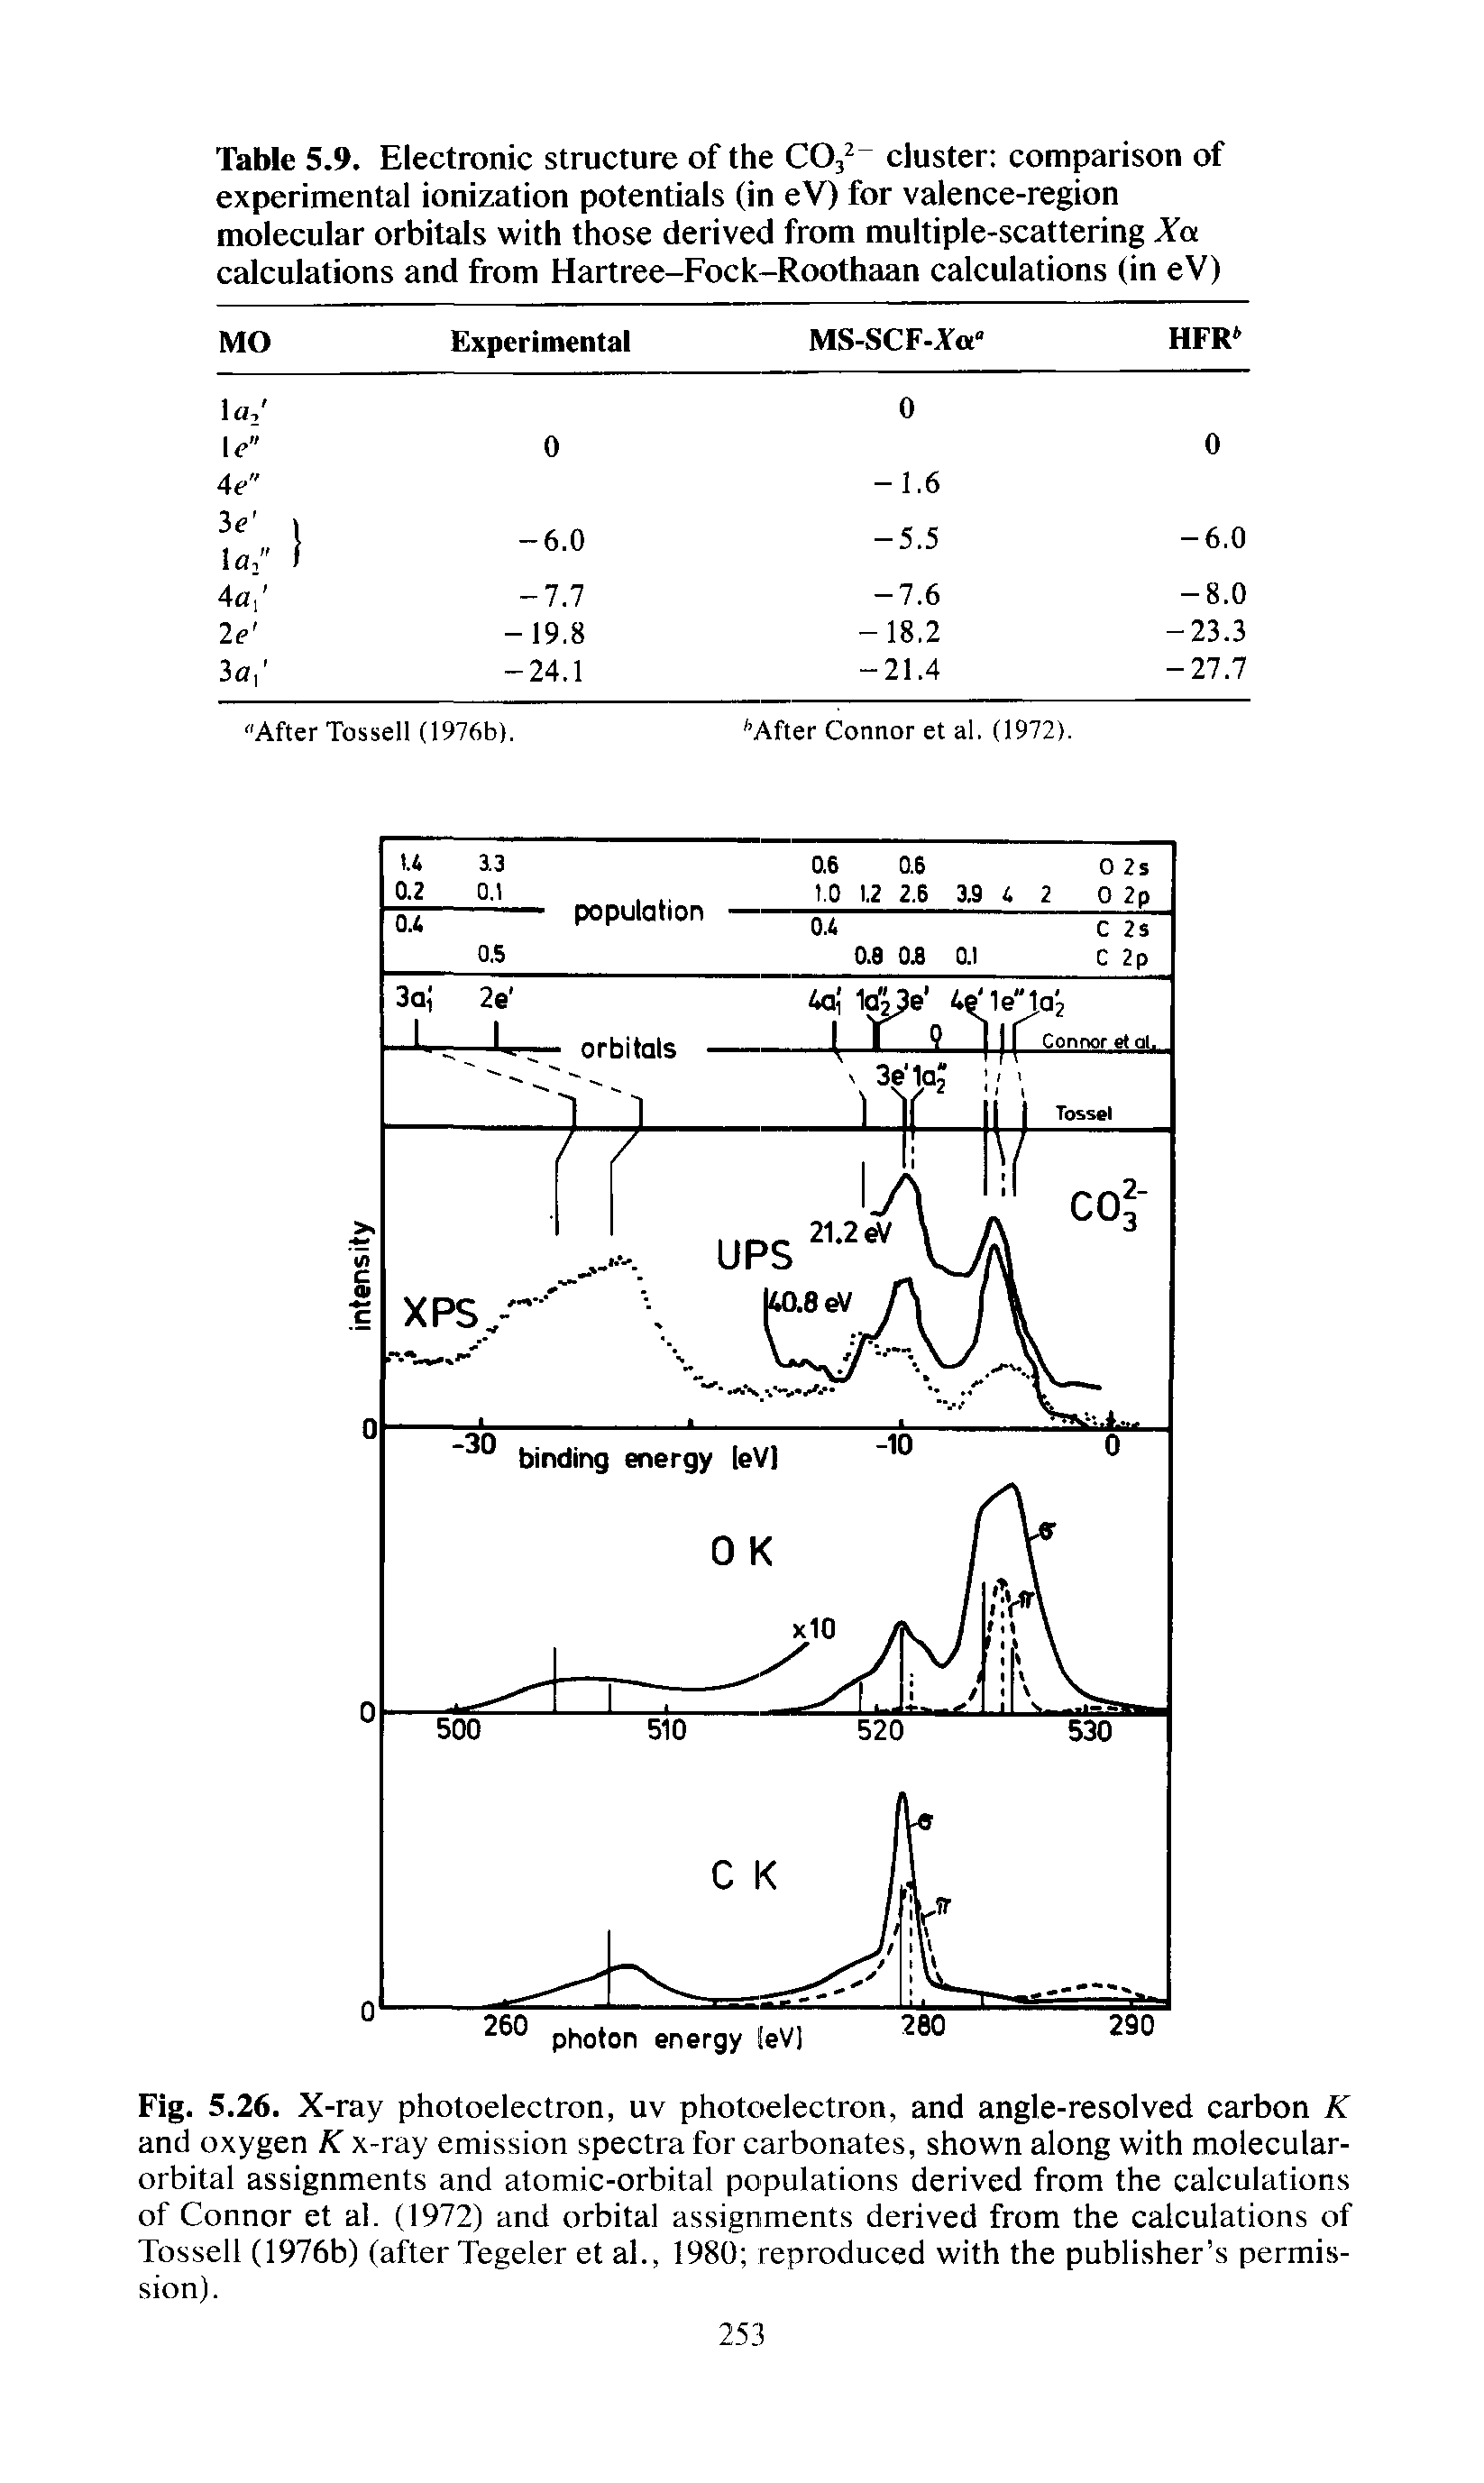 Fig. 5.26. X-ray photoelectron, uv photoelectron, and angle-resolved carbon K and oxygen K x-ray emission spectra for carbonates, shown along with molecular-orbital assignments and atomic-orbital populations derived from the calculations of Connor et al. (1972) and orbital assignments derived from the calculations of Tossell (1976b) (after Tegeler et al., 1980 reproduced with the publisher s permission).